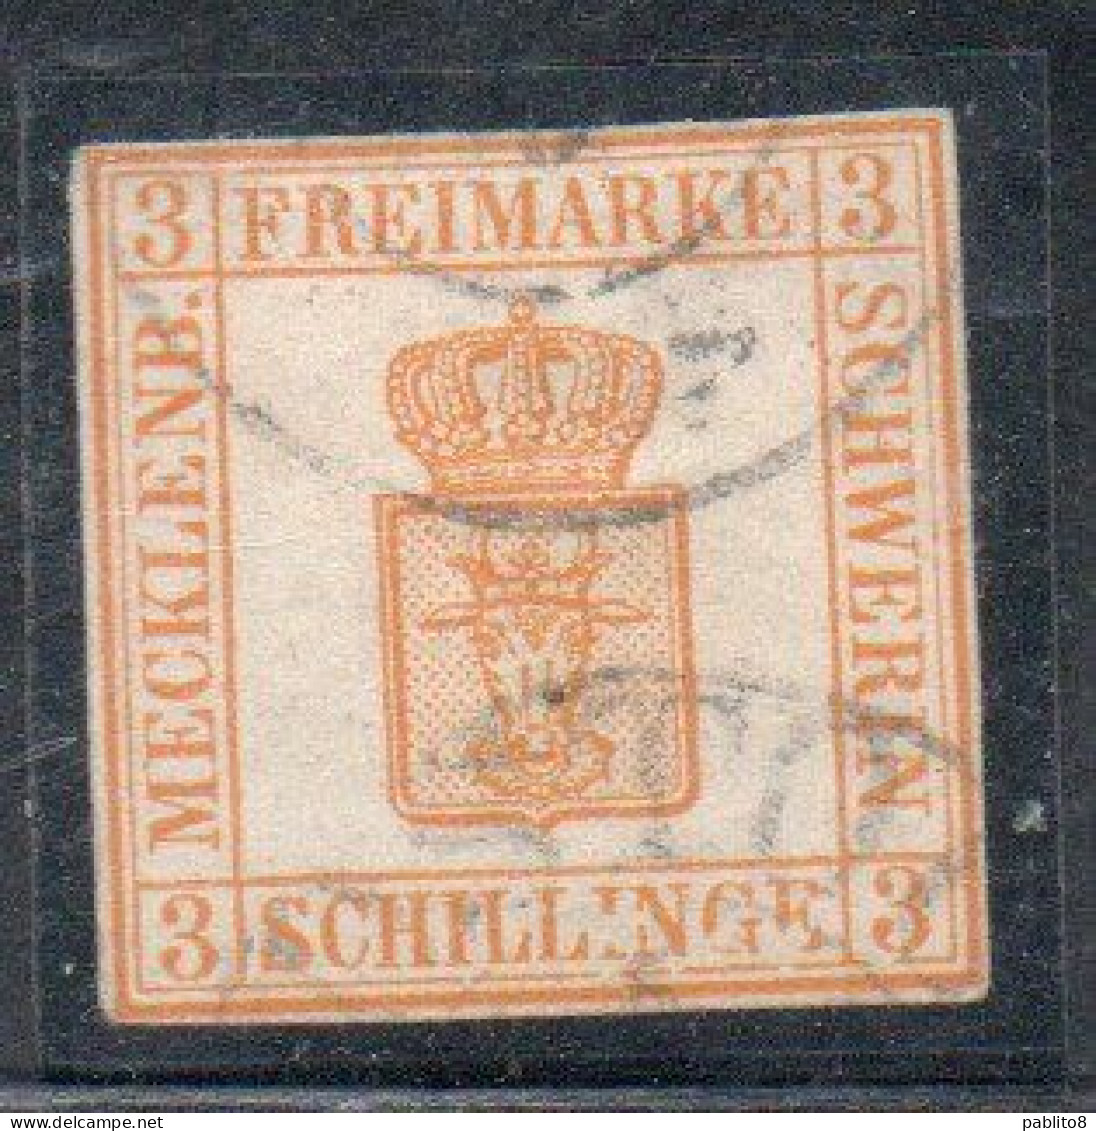 GERMANY GERMANIA GERMAN OLD STATES MECKLENBURG-SCHWERIN 1856 COAT OF ARMS STEMMA ARMOIRIES 3s USED USATO OBLITERE' - Oldenburg